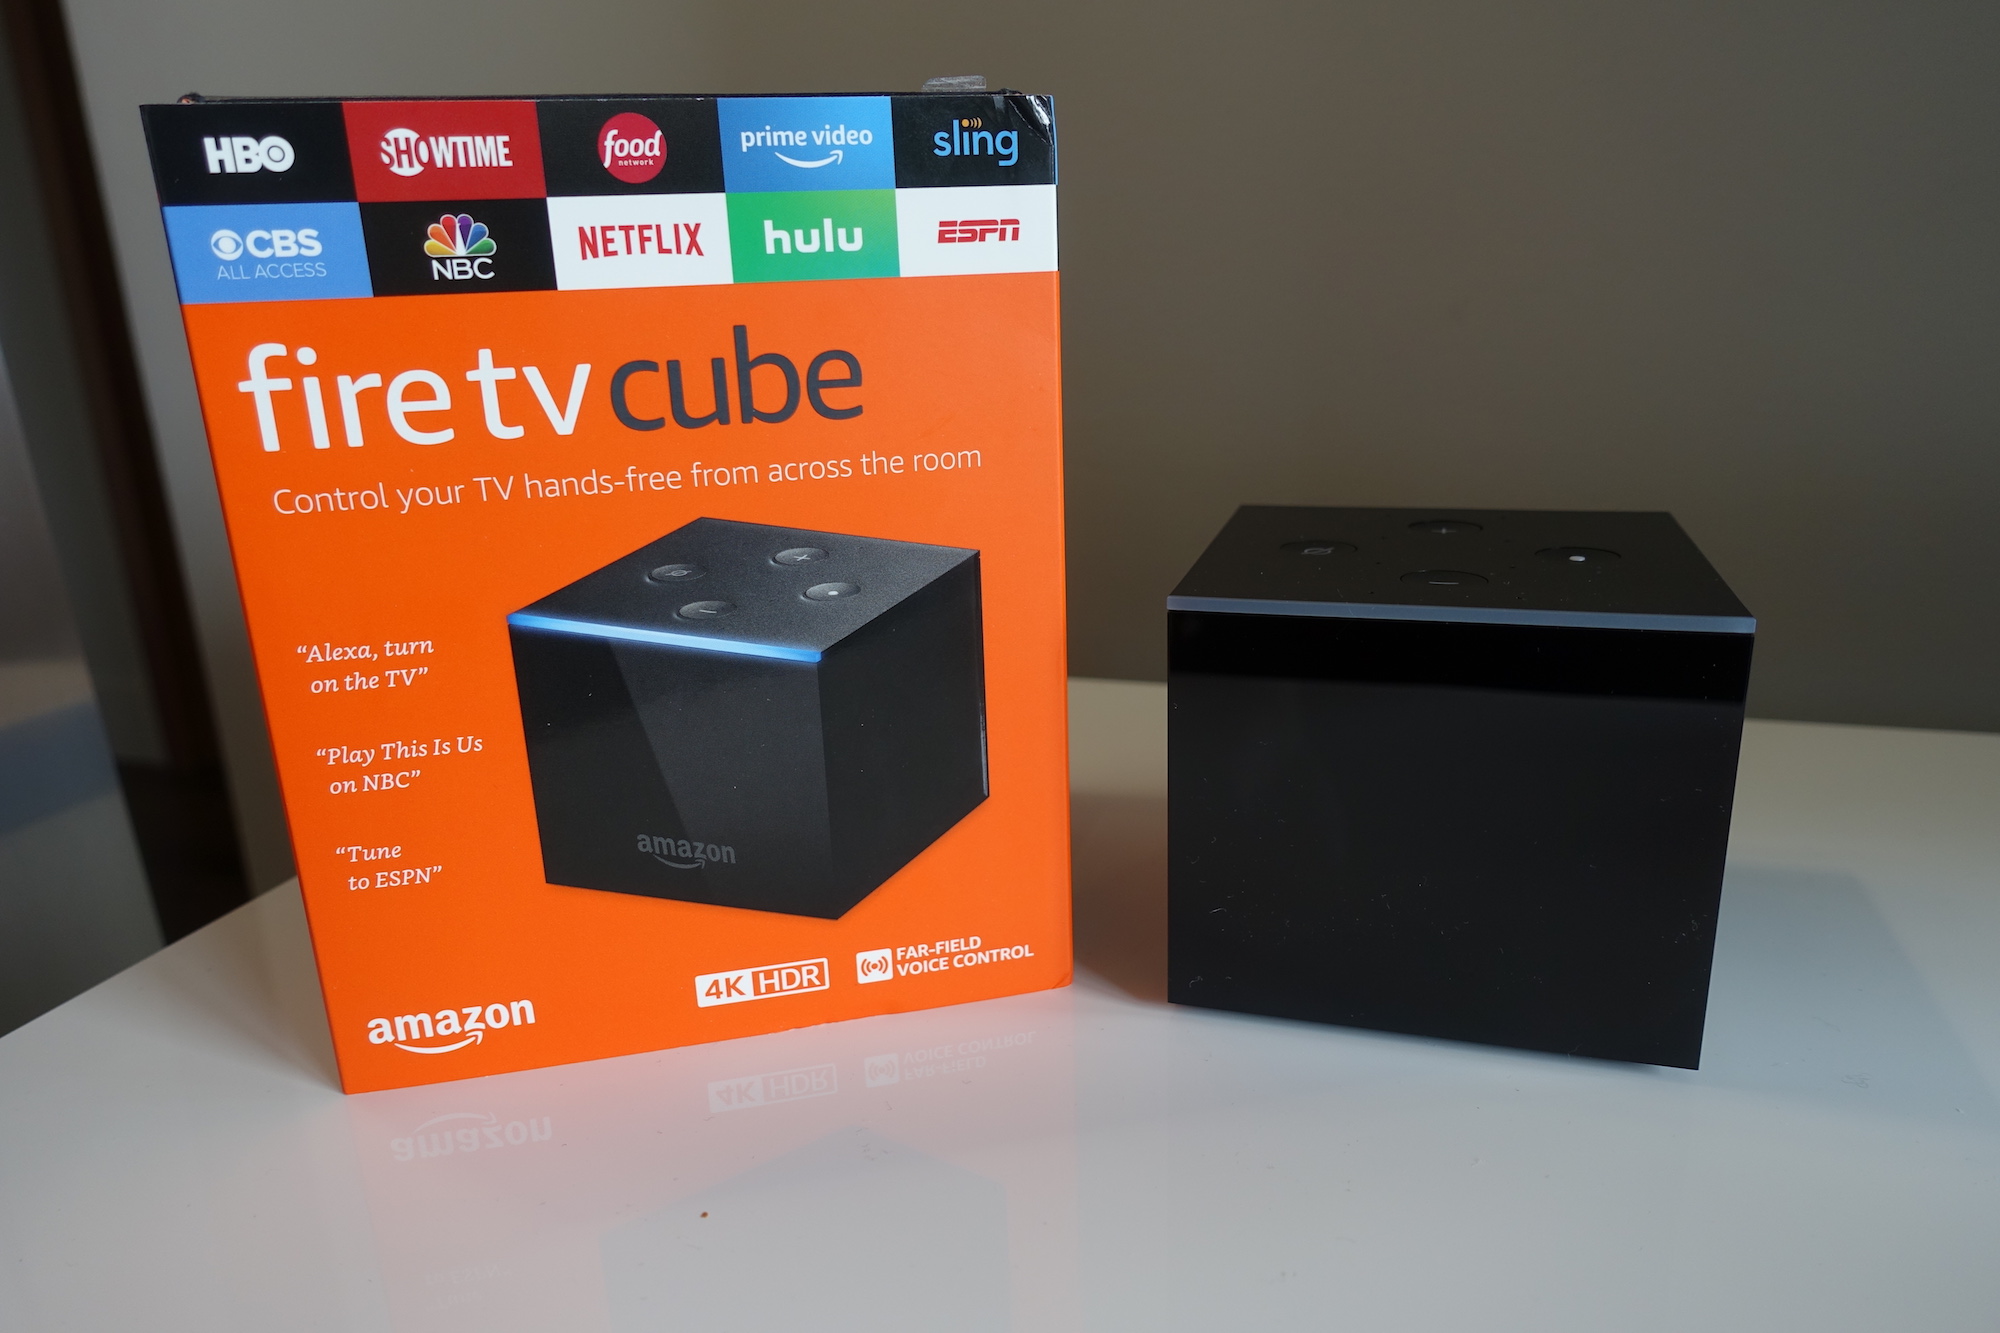 Fire TV Cube has a Micro USB port for an Ethernet Adapter and an  Infrared port